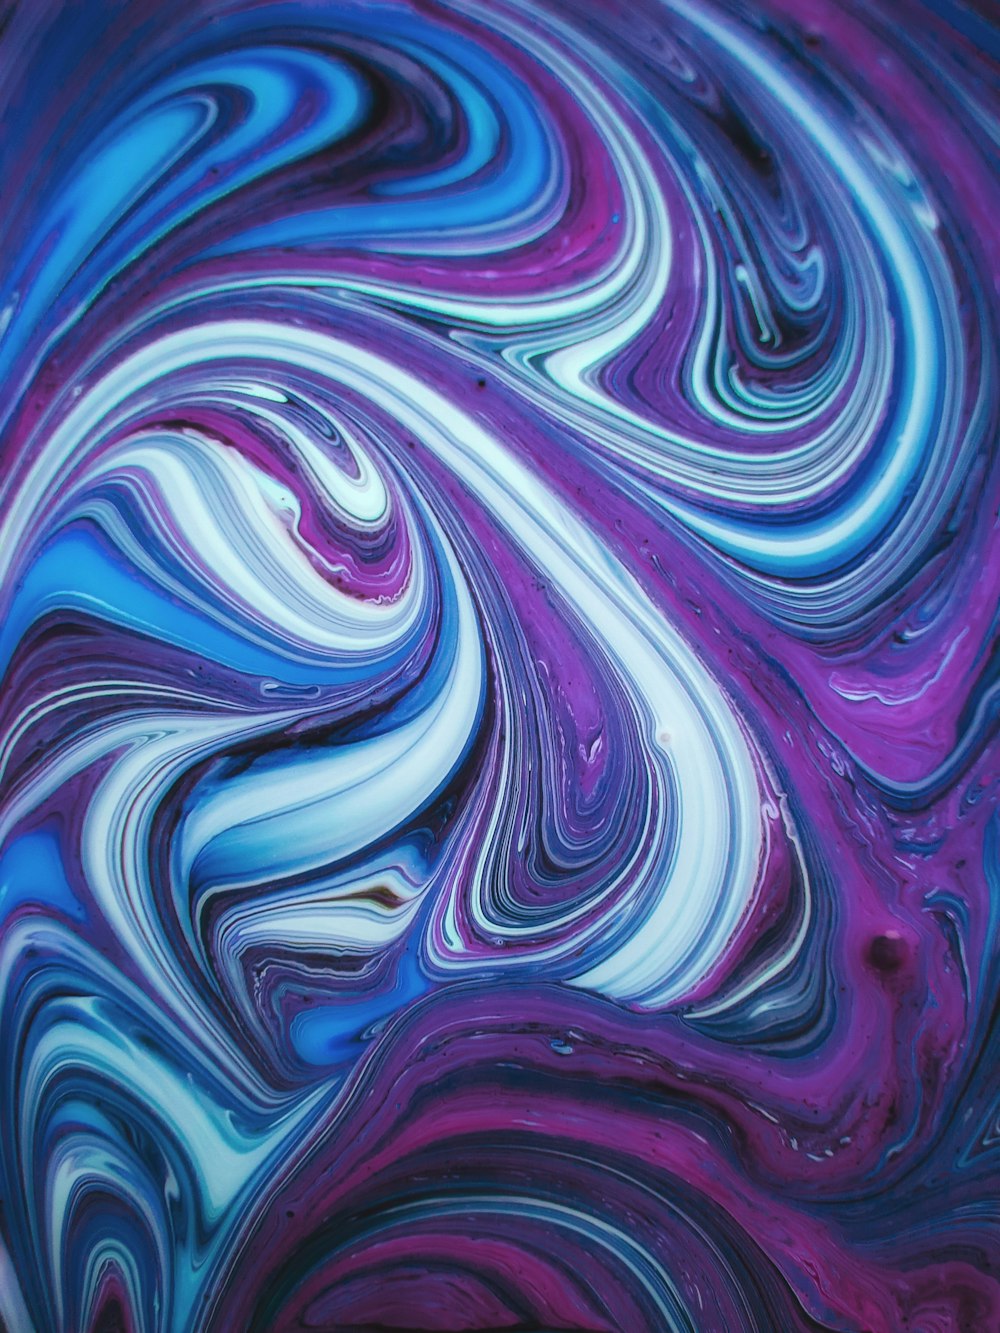 a close up of a purple and blue swirl